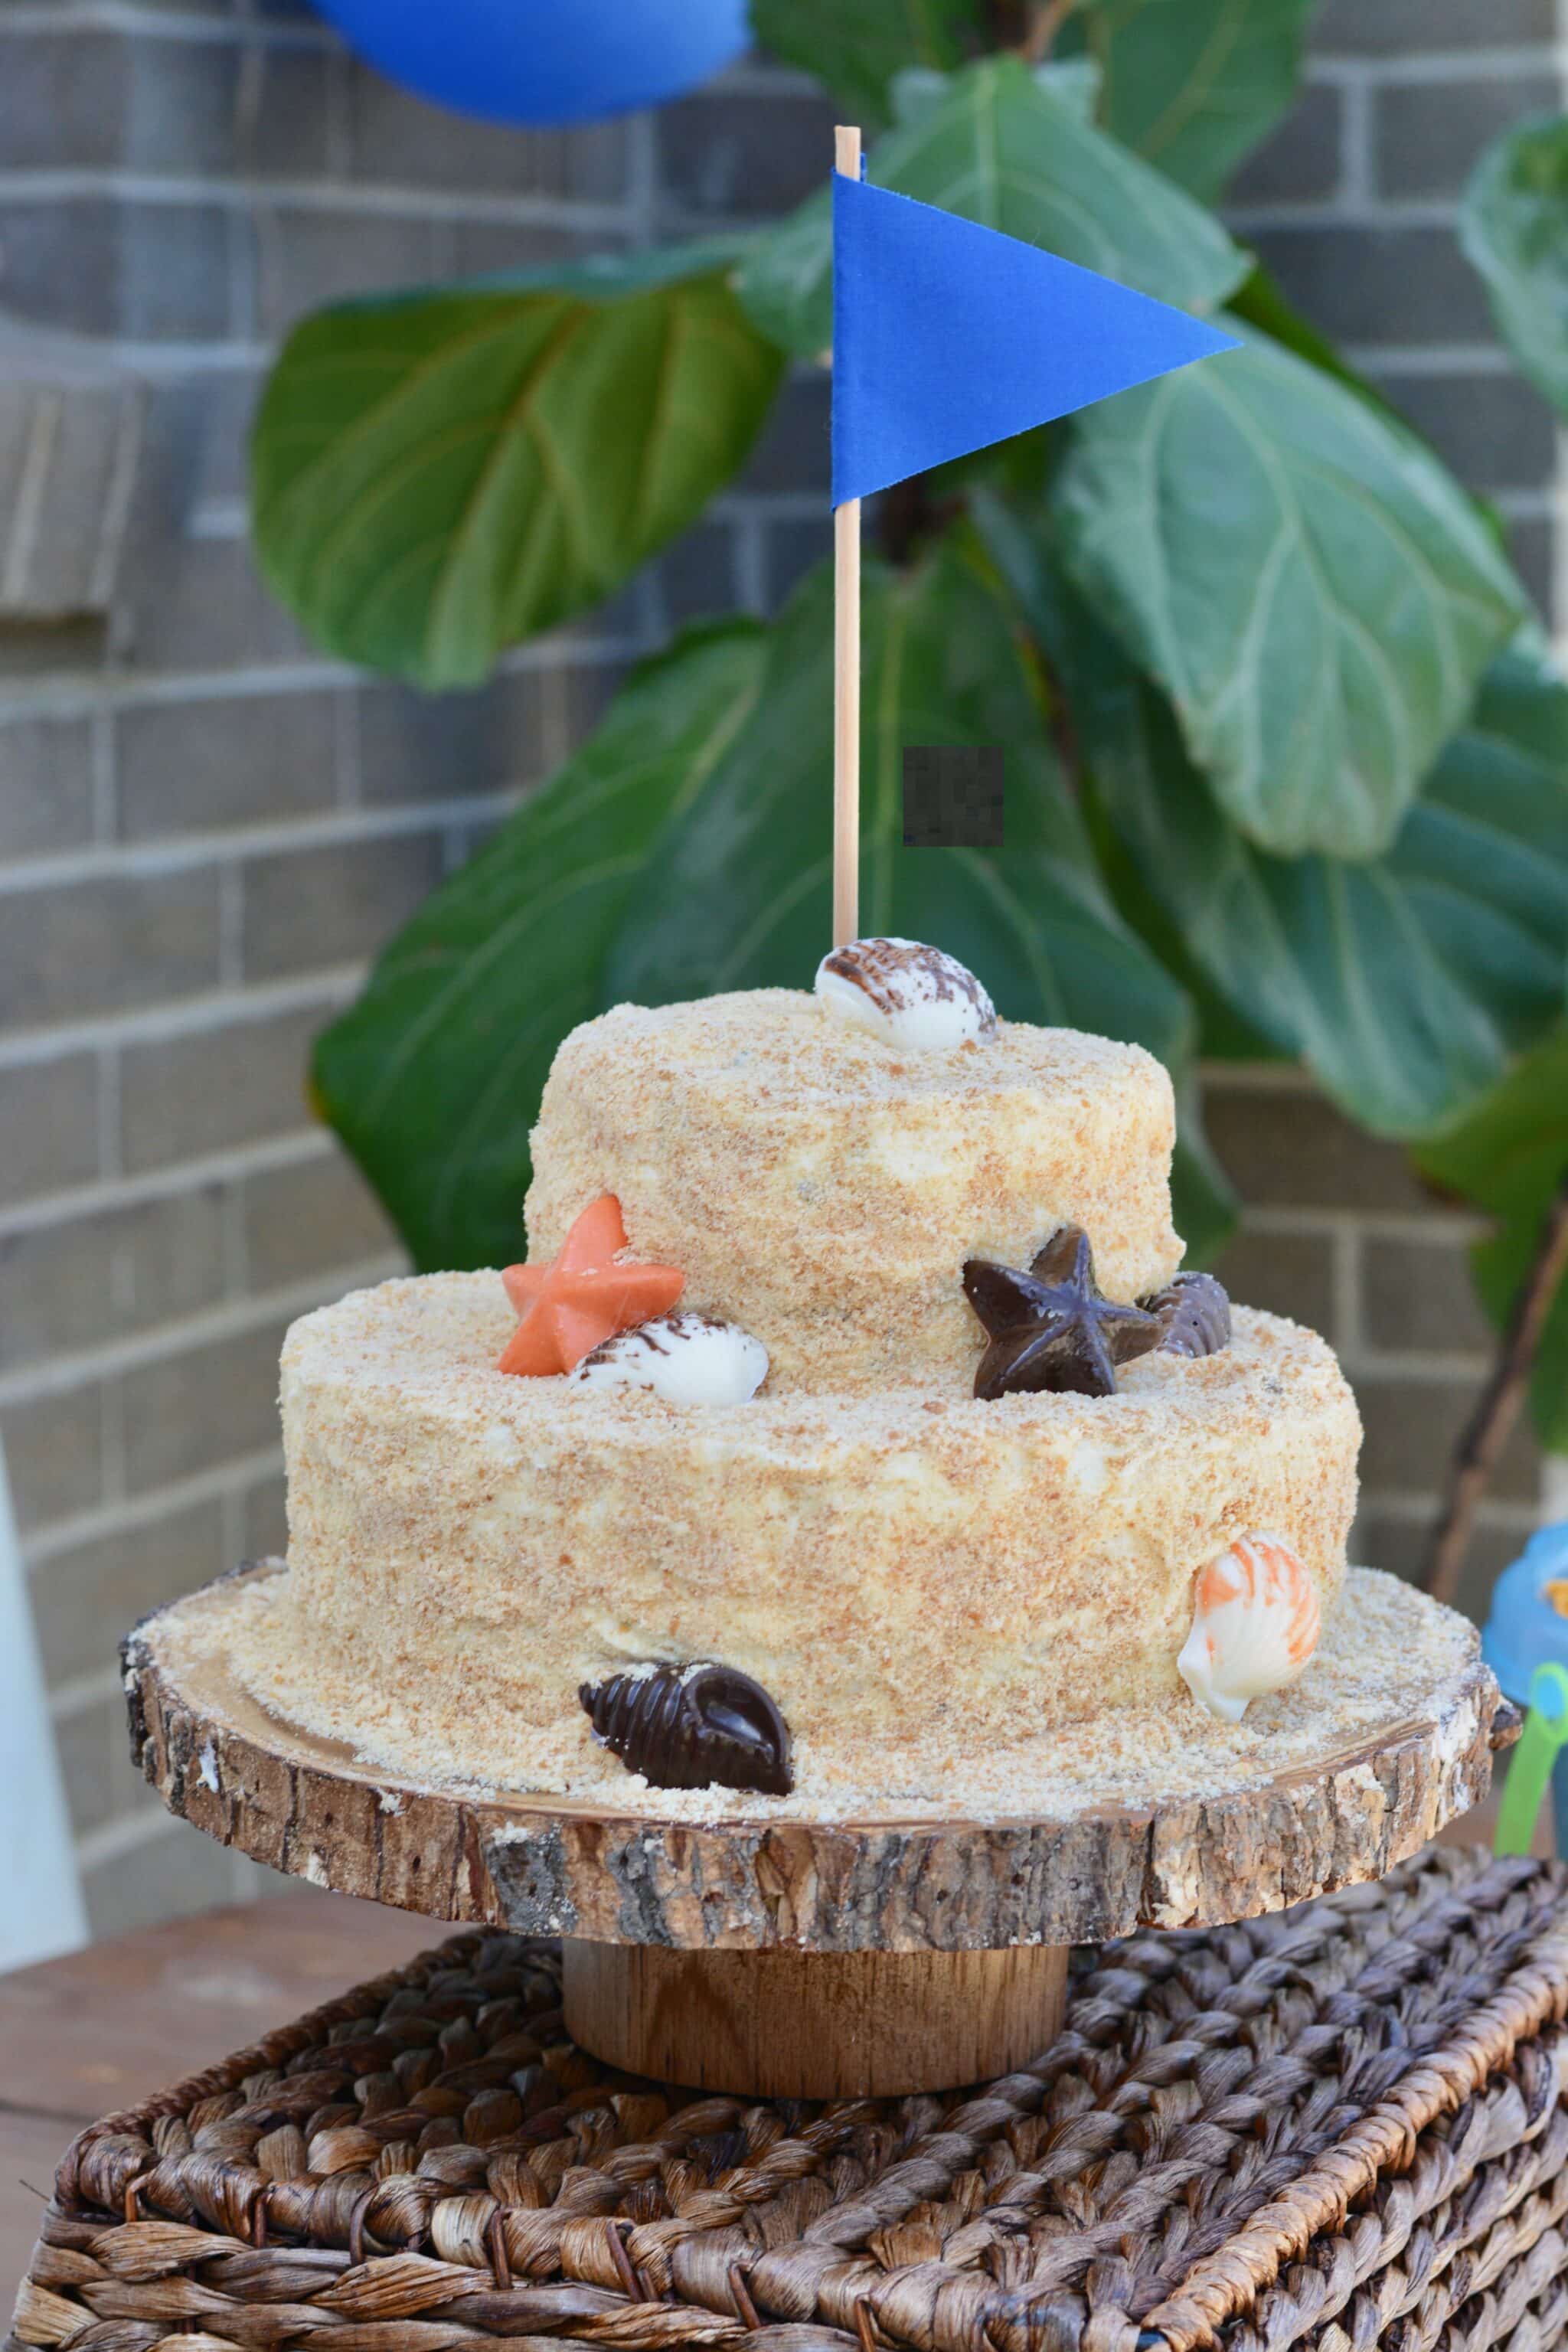 Boy Beach Theme Birthday Party - With recipes and decorating ideas, including activities and simply delicious snacks for kids and adults!